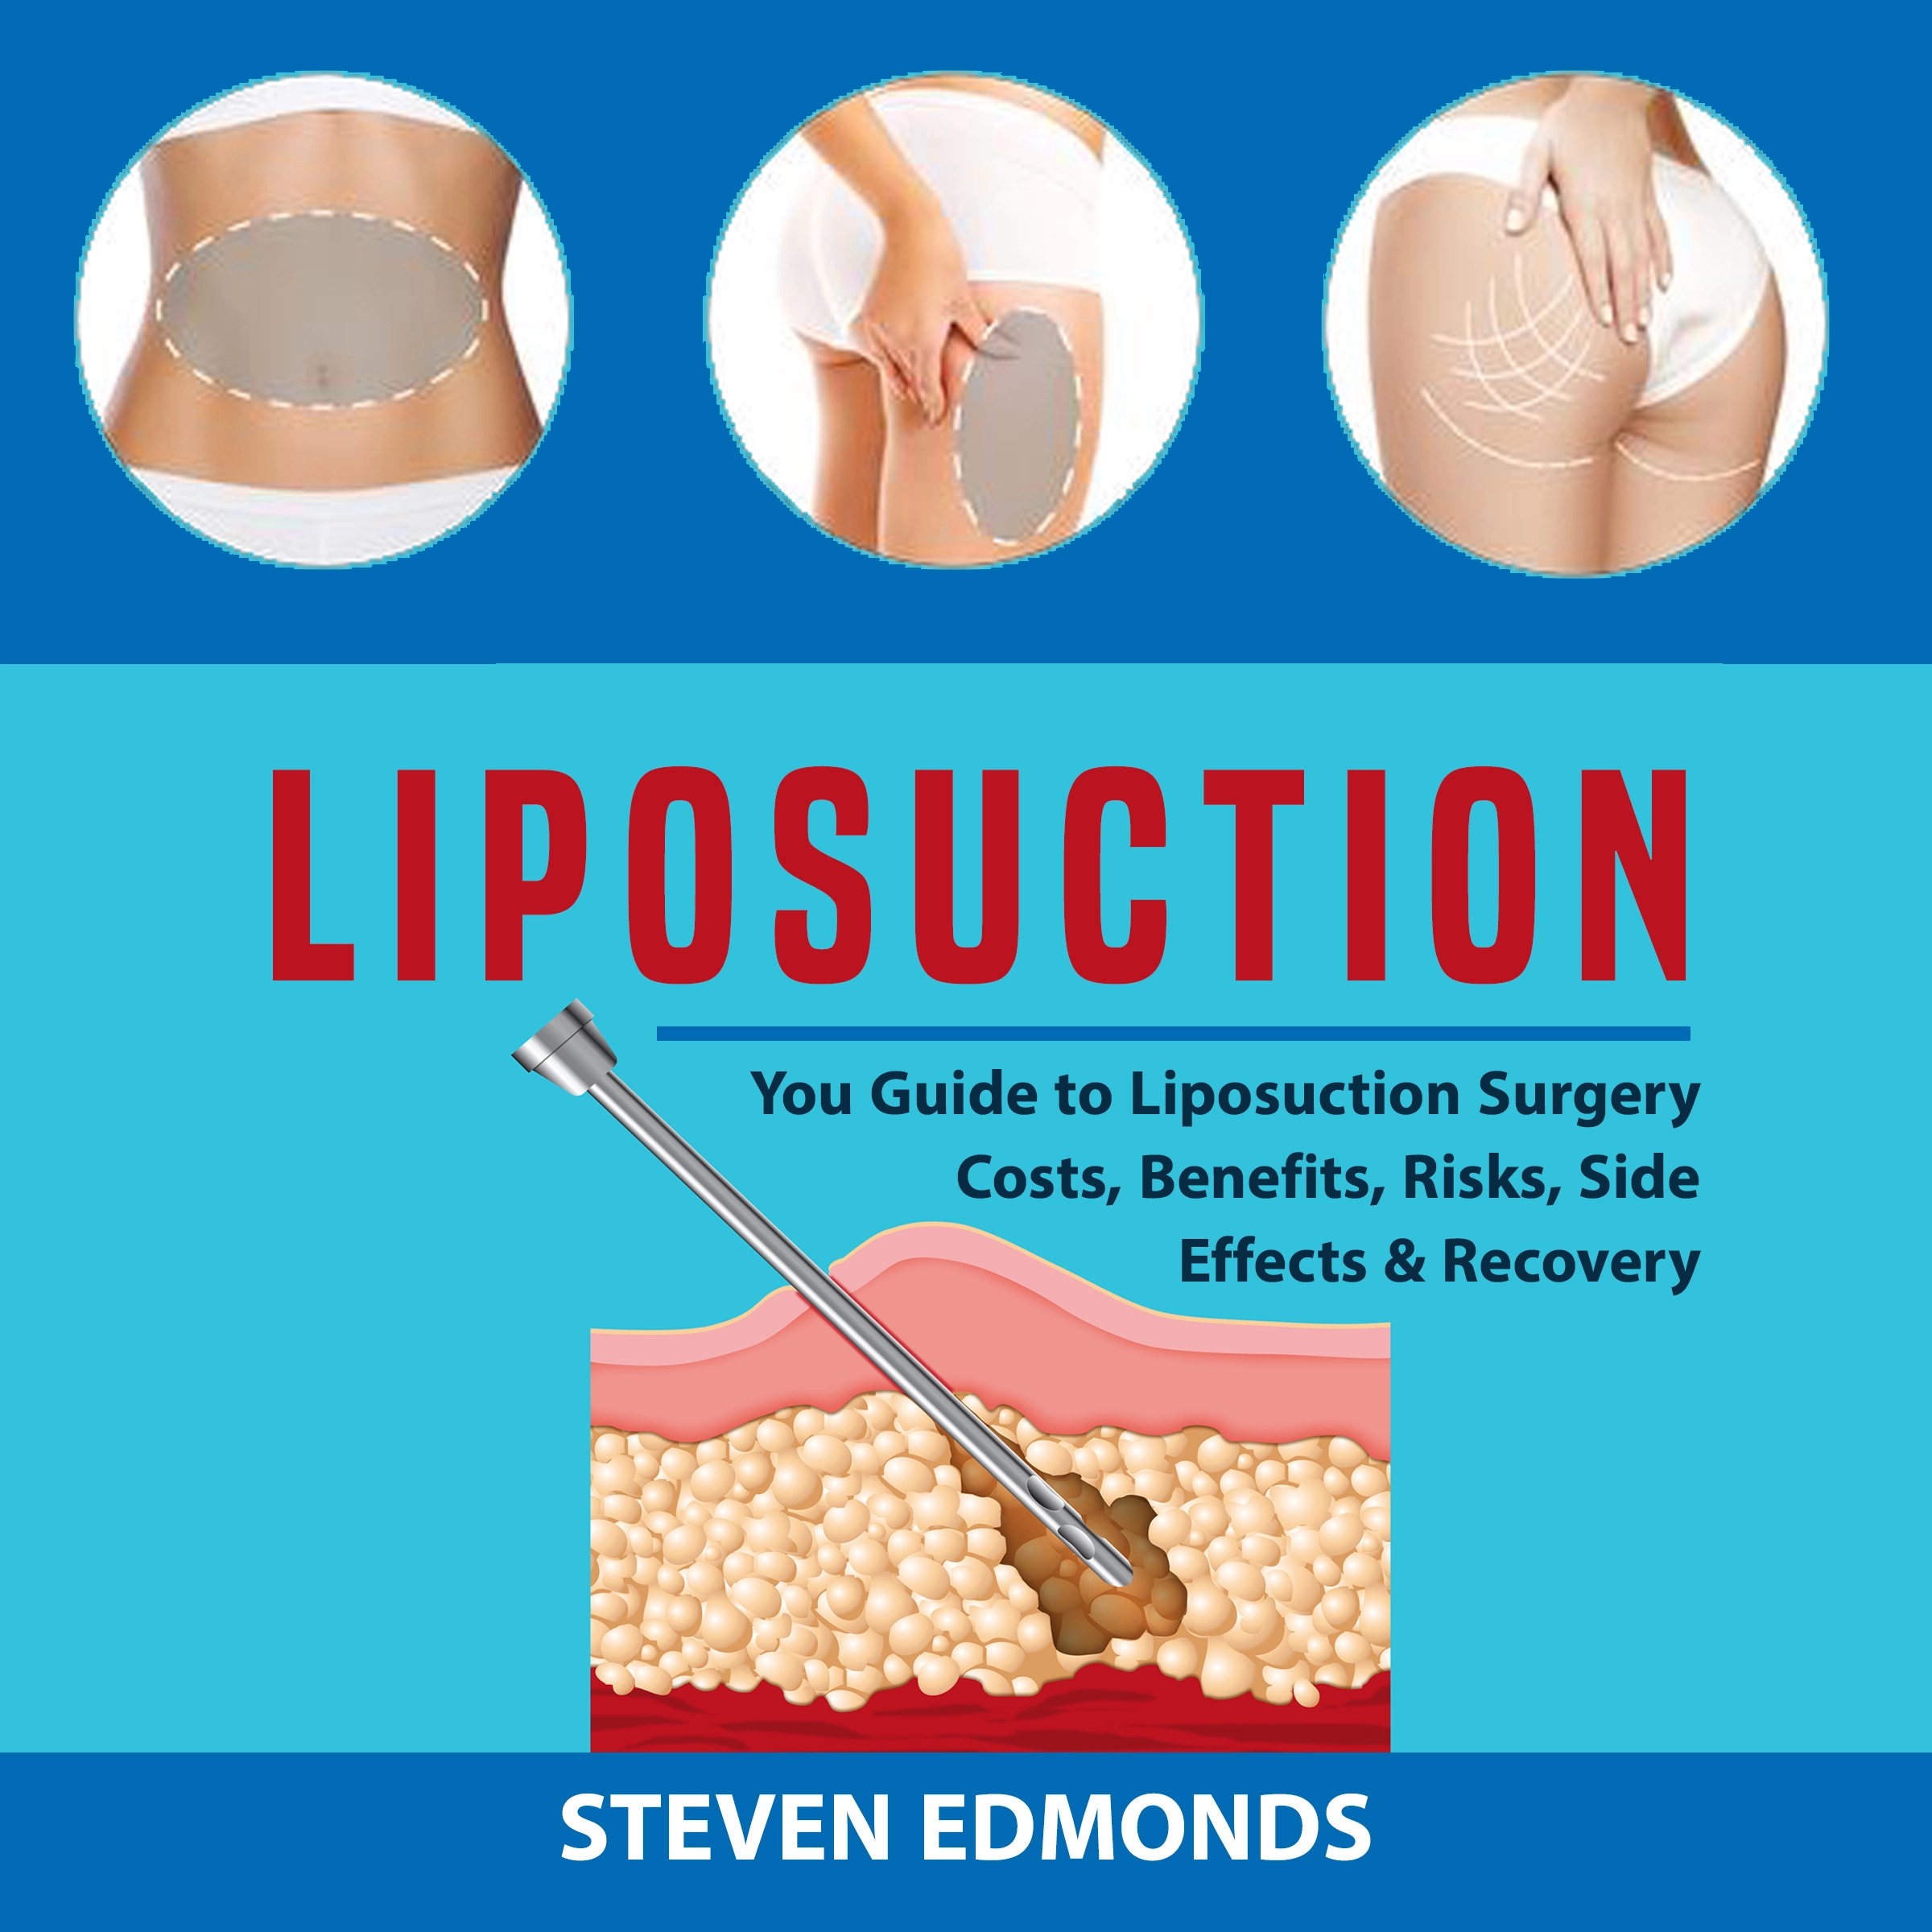 Liposuction: You Guide to Liposuction Surgery Costs, Benefits, Risks, Side Effects & Recovery Audiobook by Steven Edmonds